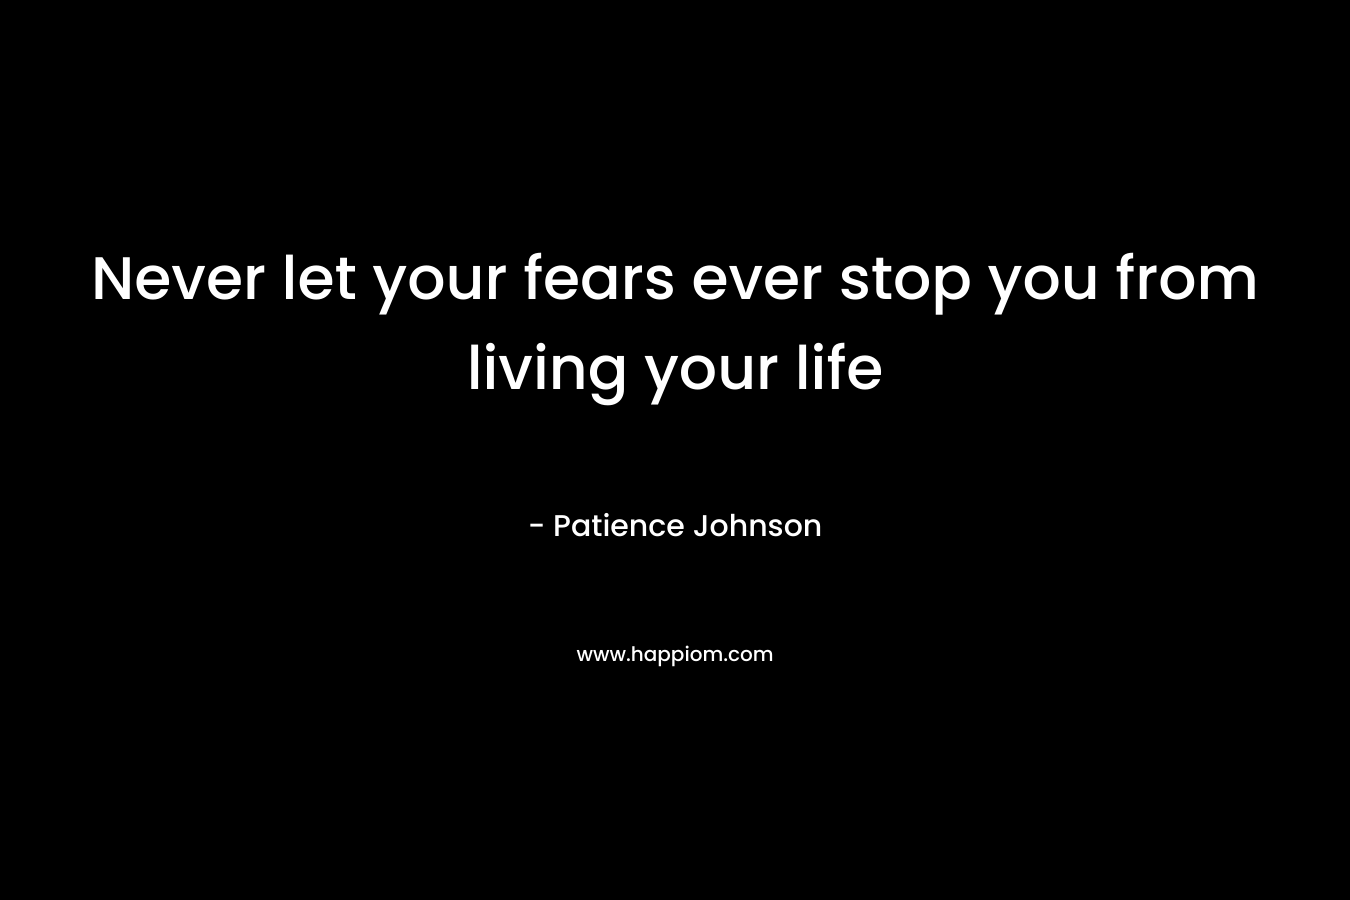 Never let your fears ever stop you from living your life – Patience Johnson